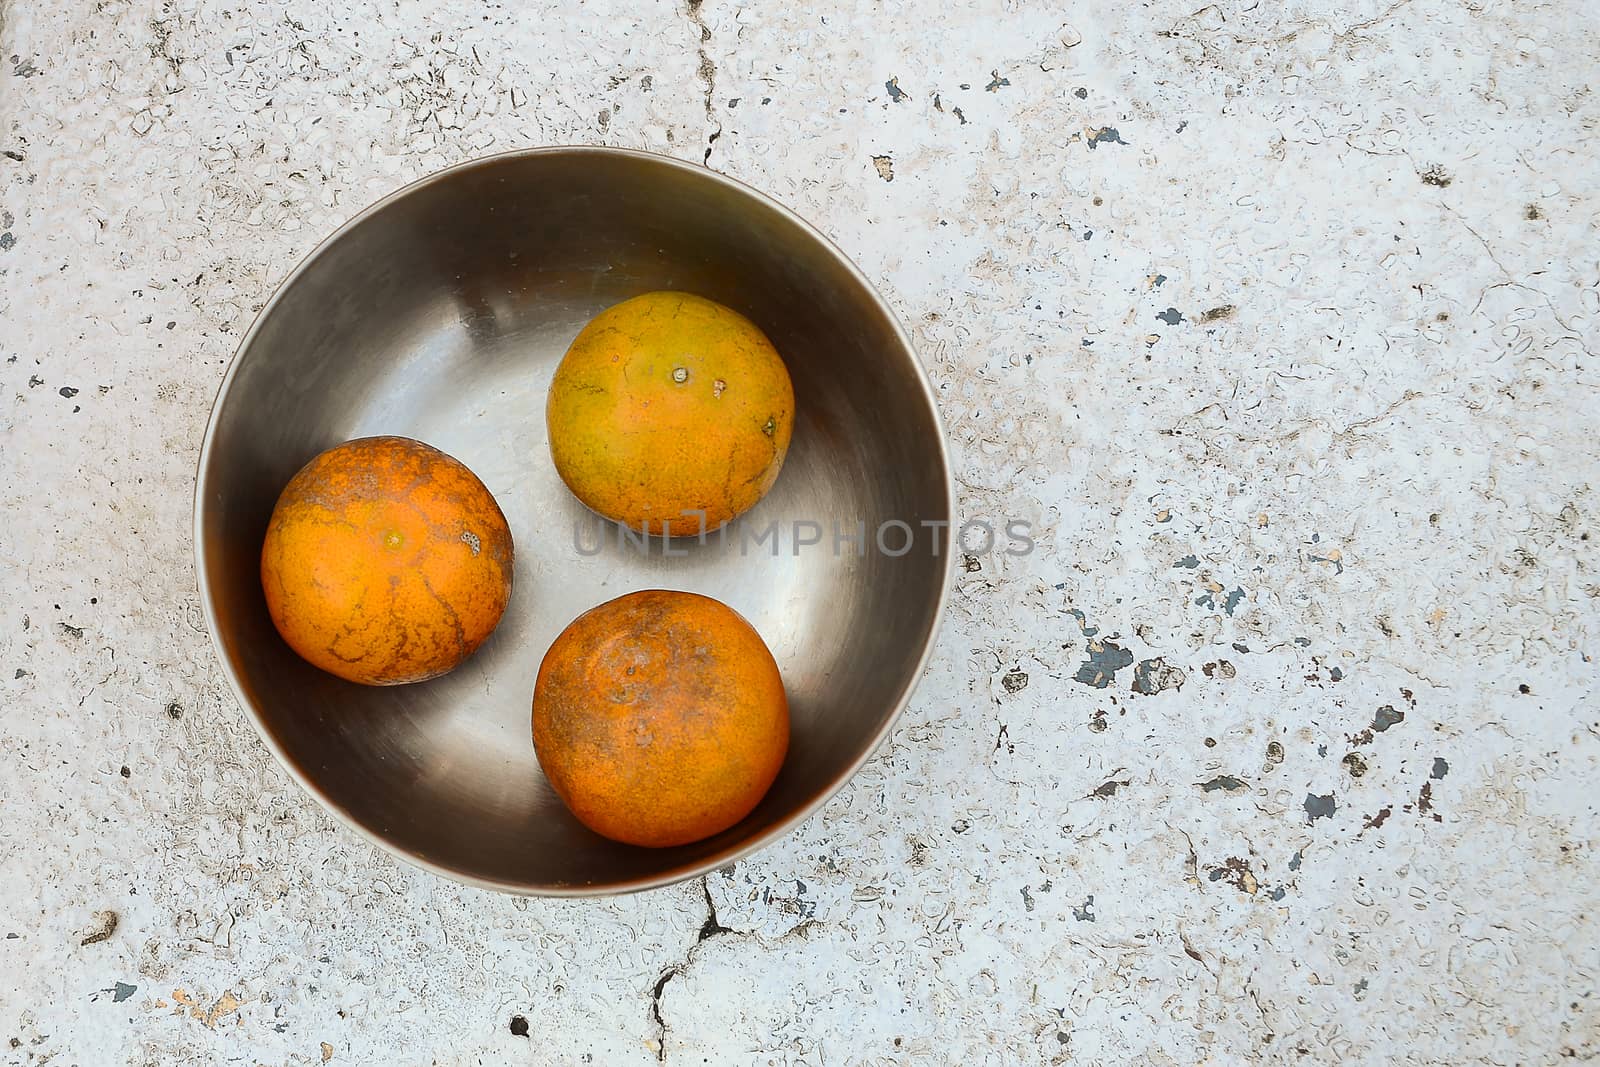 tree oranges in stainless steel bowl on white stone table